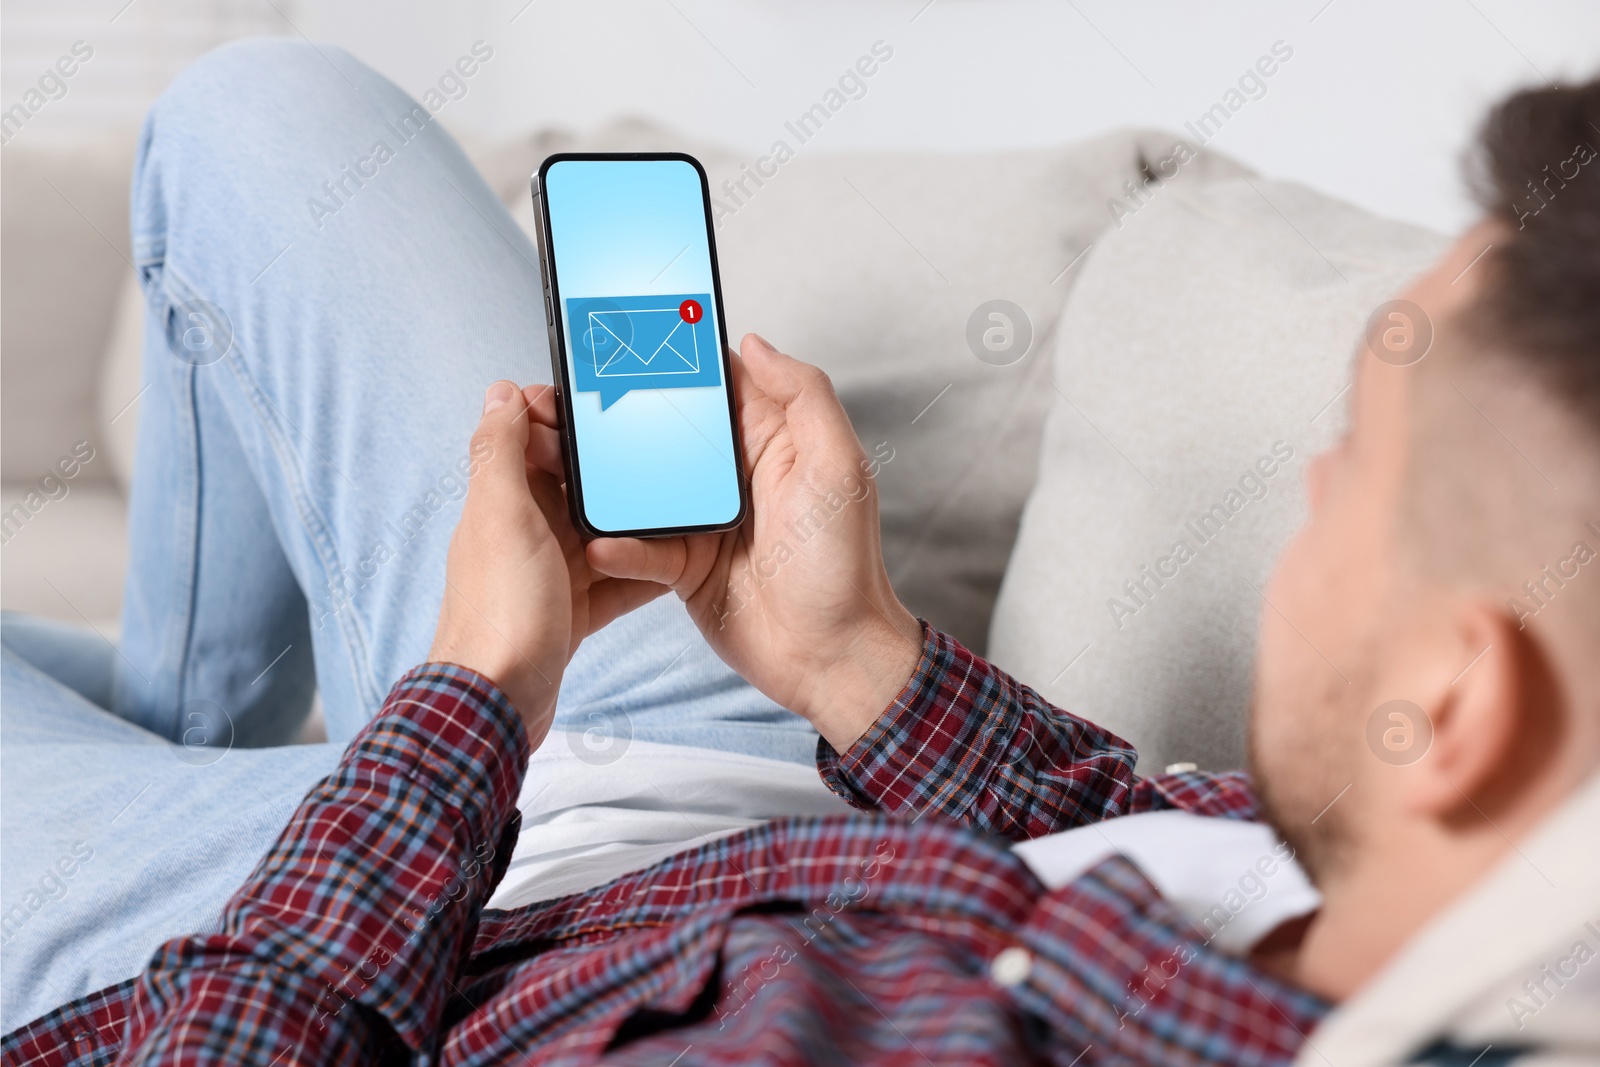 Image of New message notification. Man with mobile phone indoors, closeup